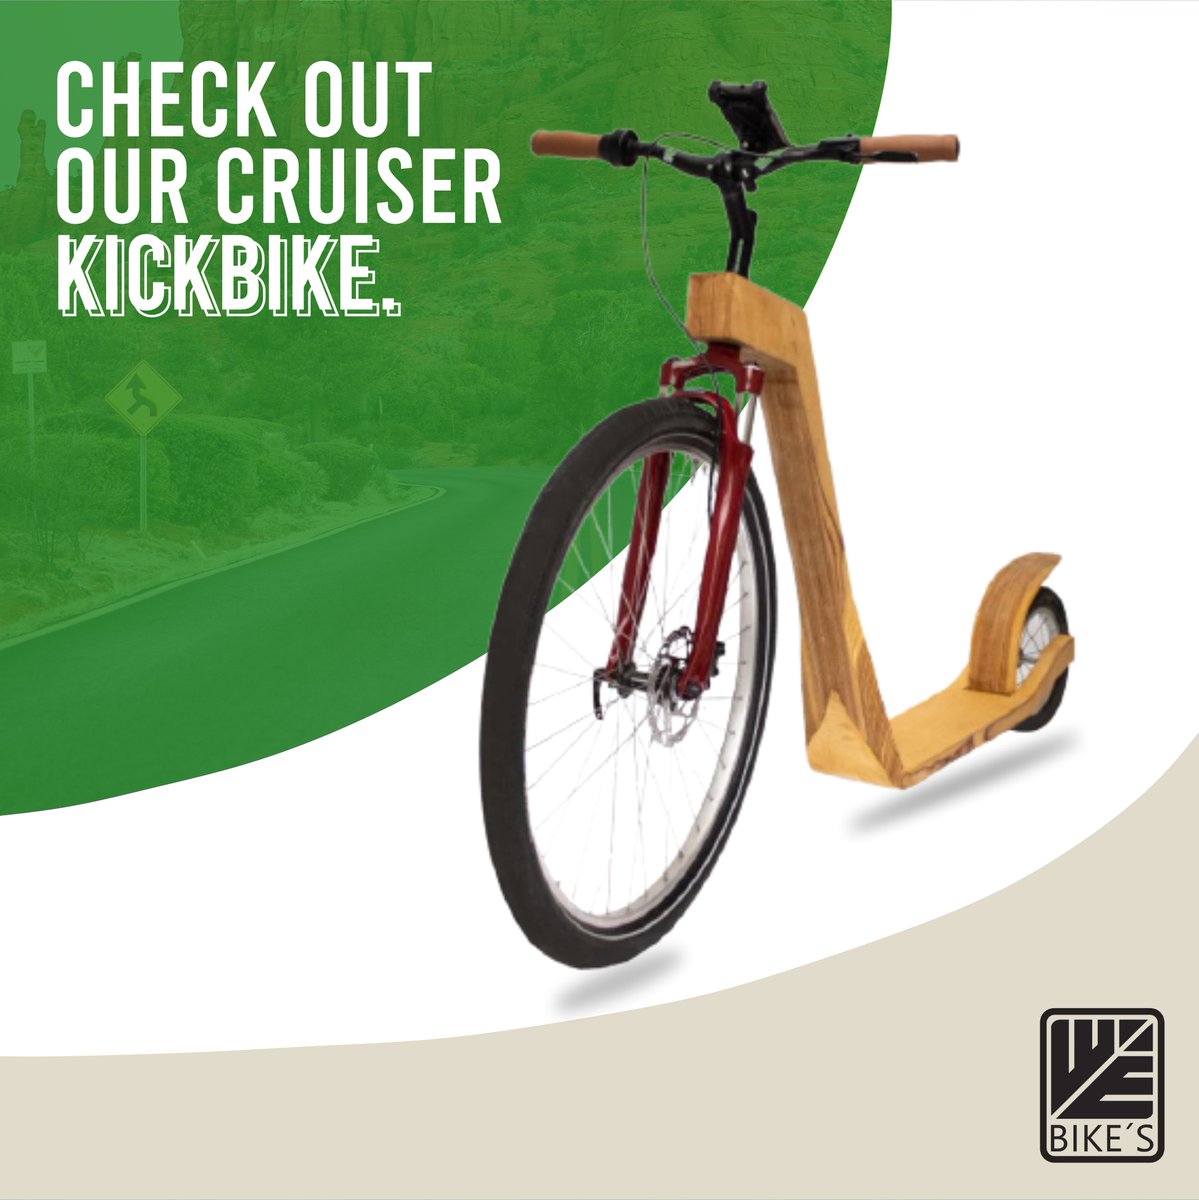 The Cruiser Kickbike is our all-around scooter for the young at heart and sporty motivated people. The massive, handcrafted frame ensures maximum stability and flexibility when driving.
----
🌐 wooden-kickbike.de
.
#woodenkickbikes #wooden #unique #handmade #webikes